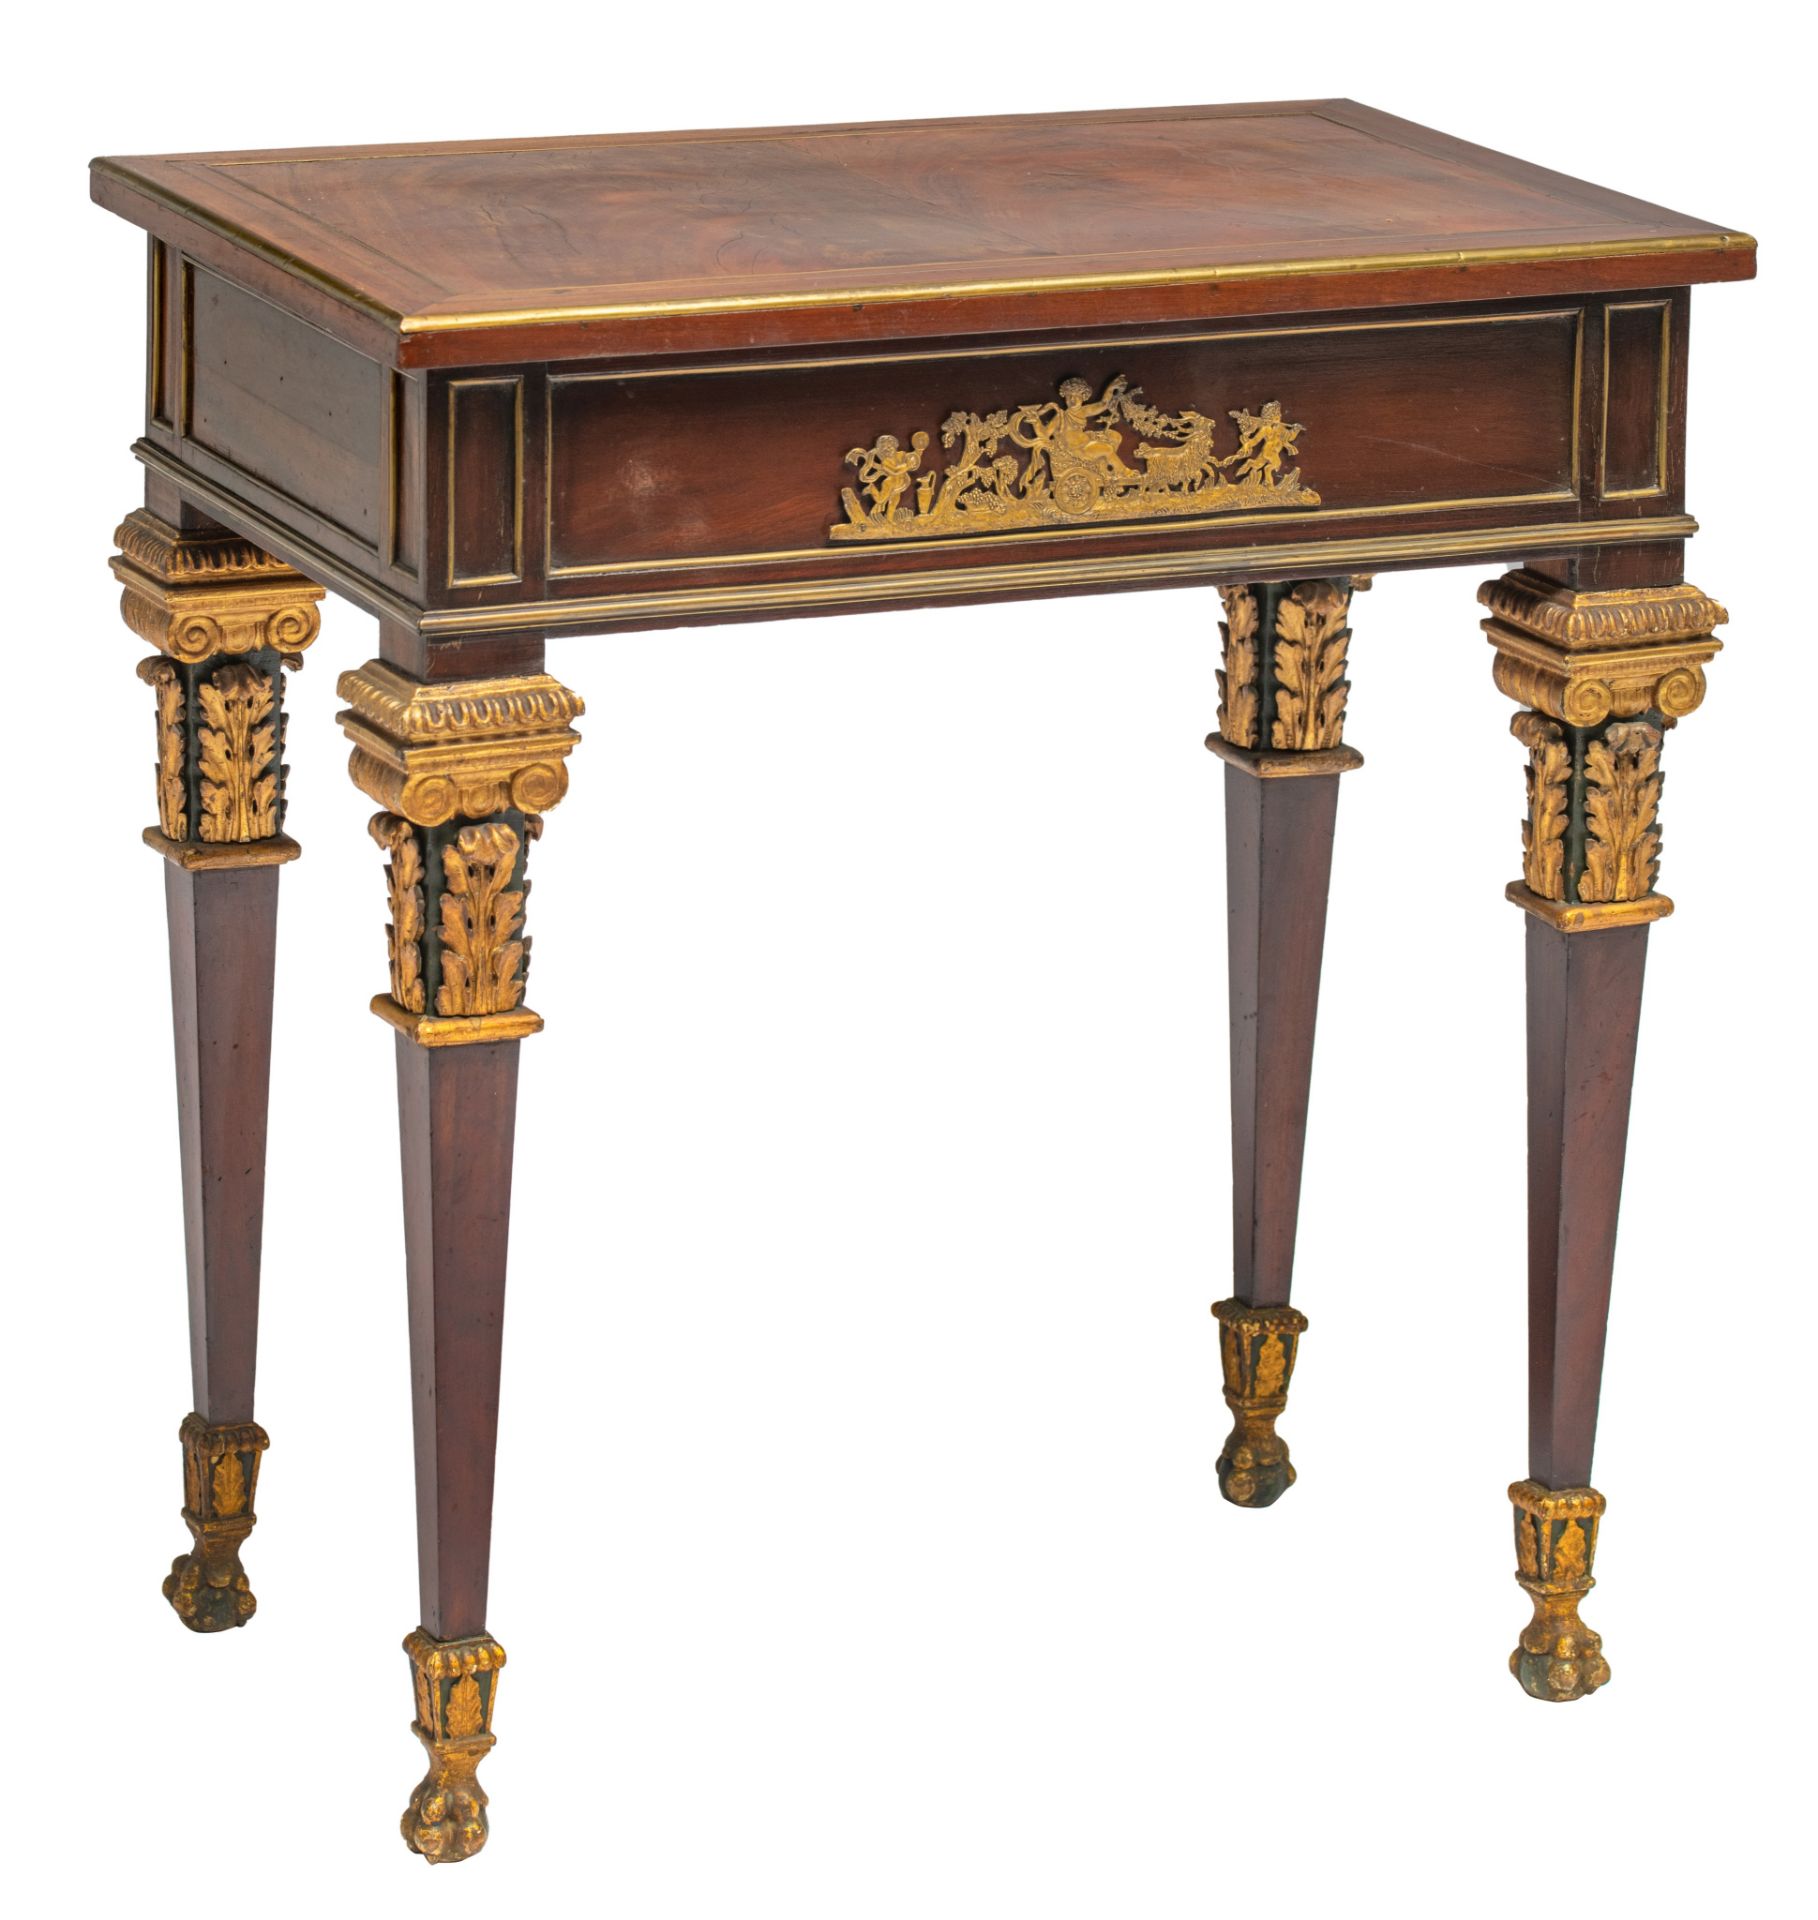 A small Neoclassical occasional table, H 75,5 - W 70 - D 44 cm